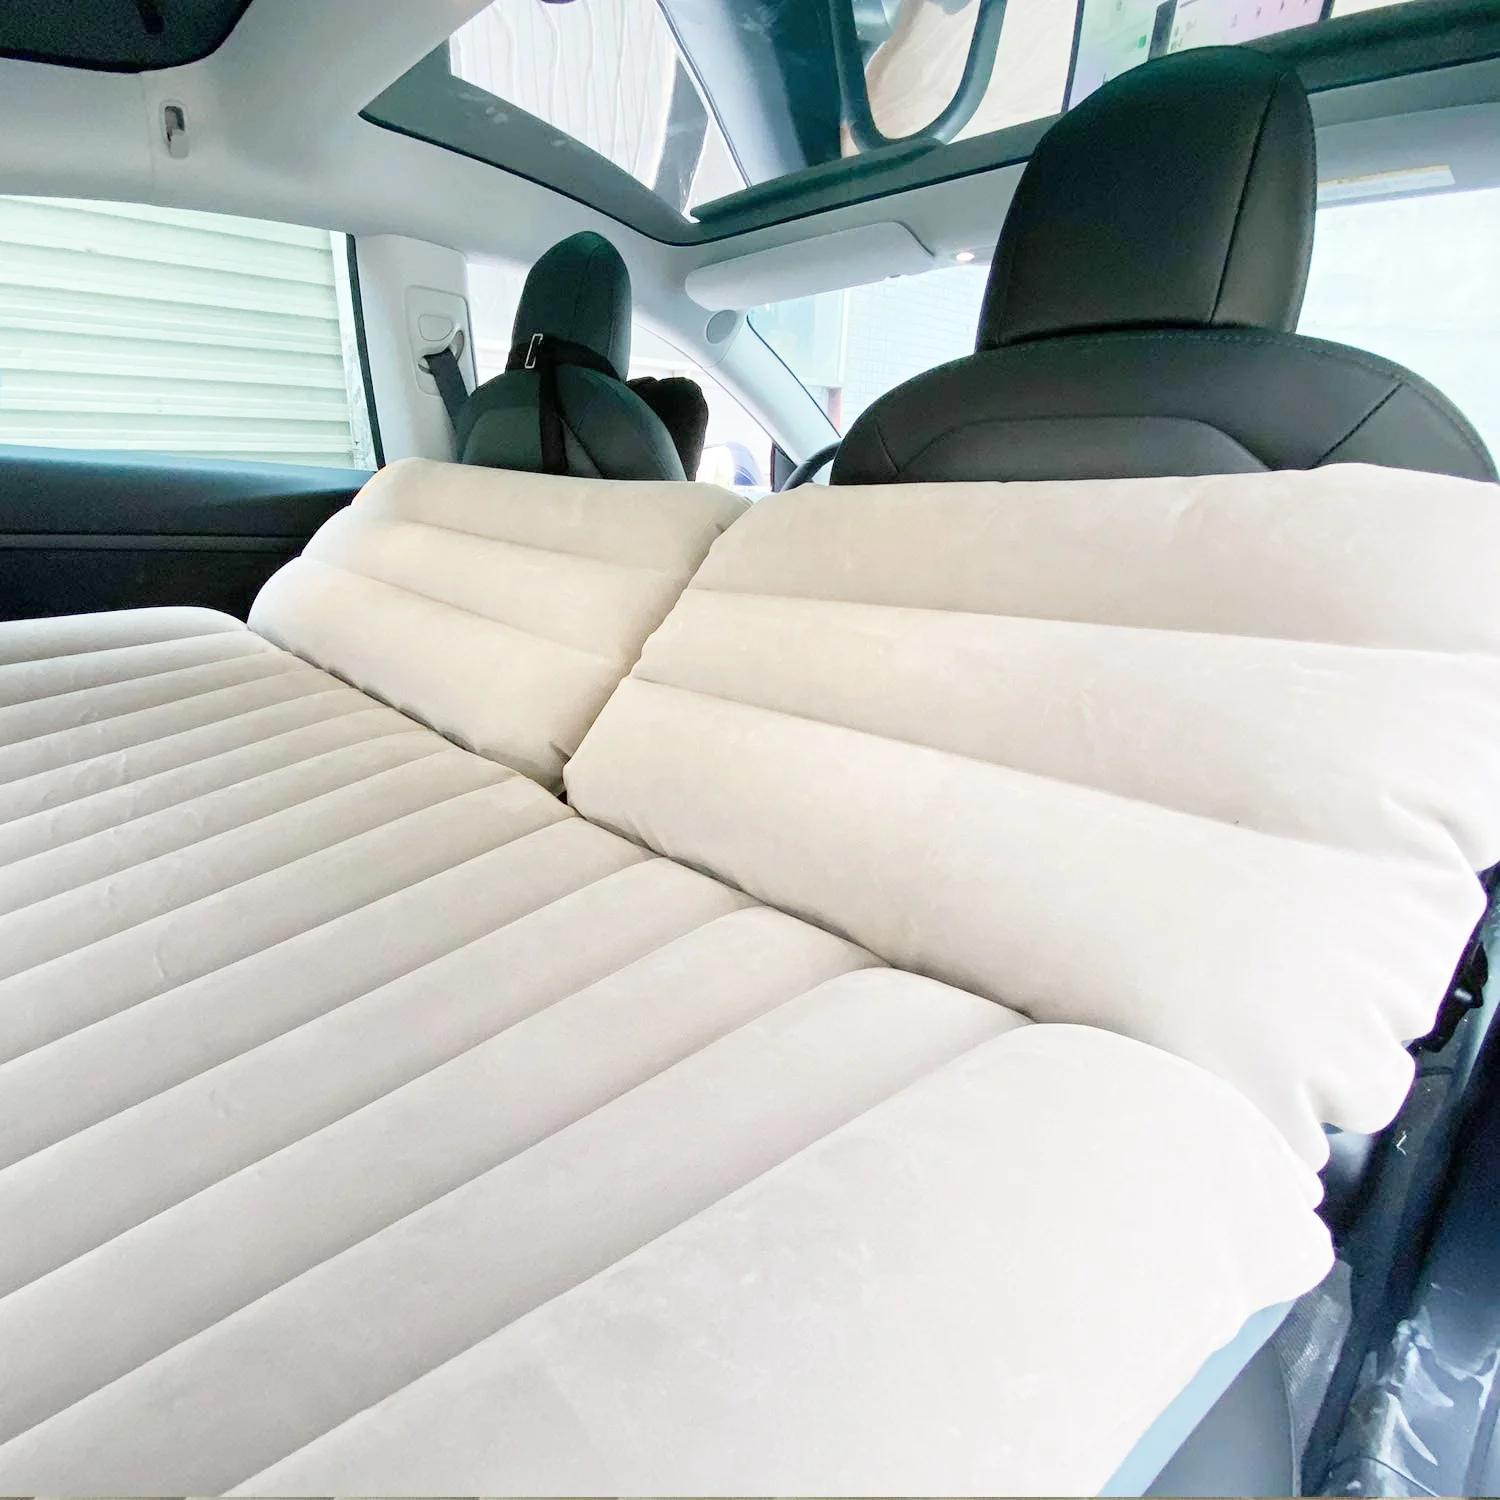 BMZX Model 3 Car Travel Inflatable Mattress Air Bed Cushion Portable Camping Universal for SUV Extend Air Couch with Two Air Pillows for Tesla Model 3 